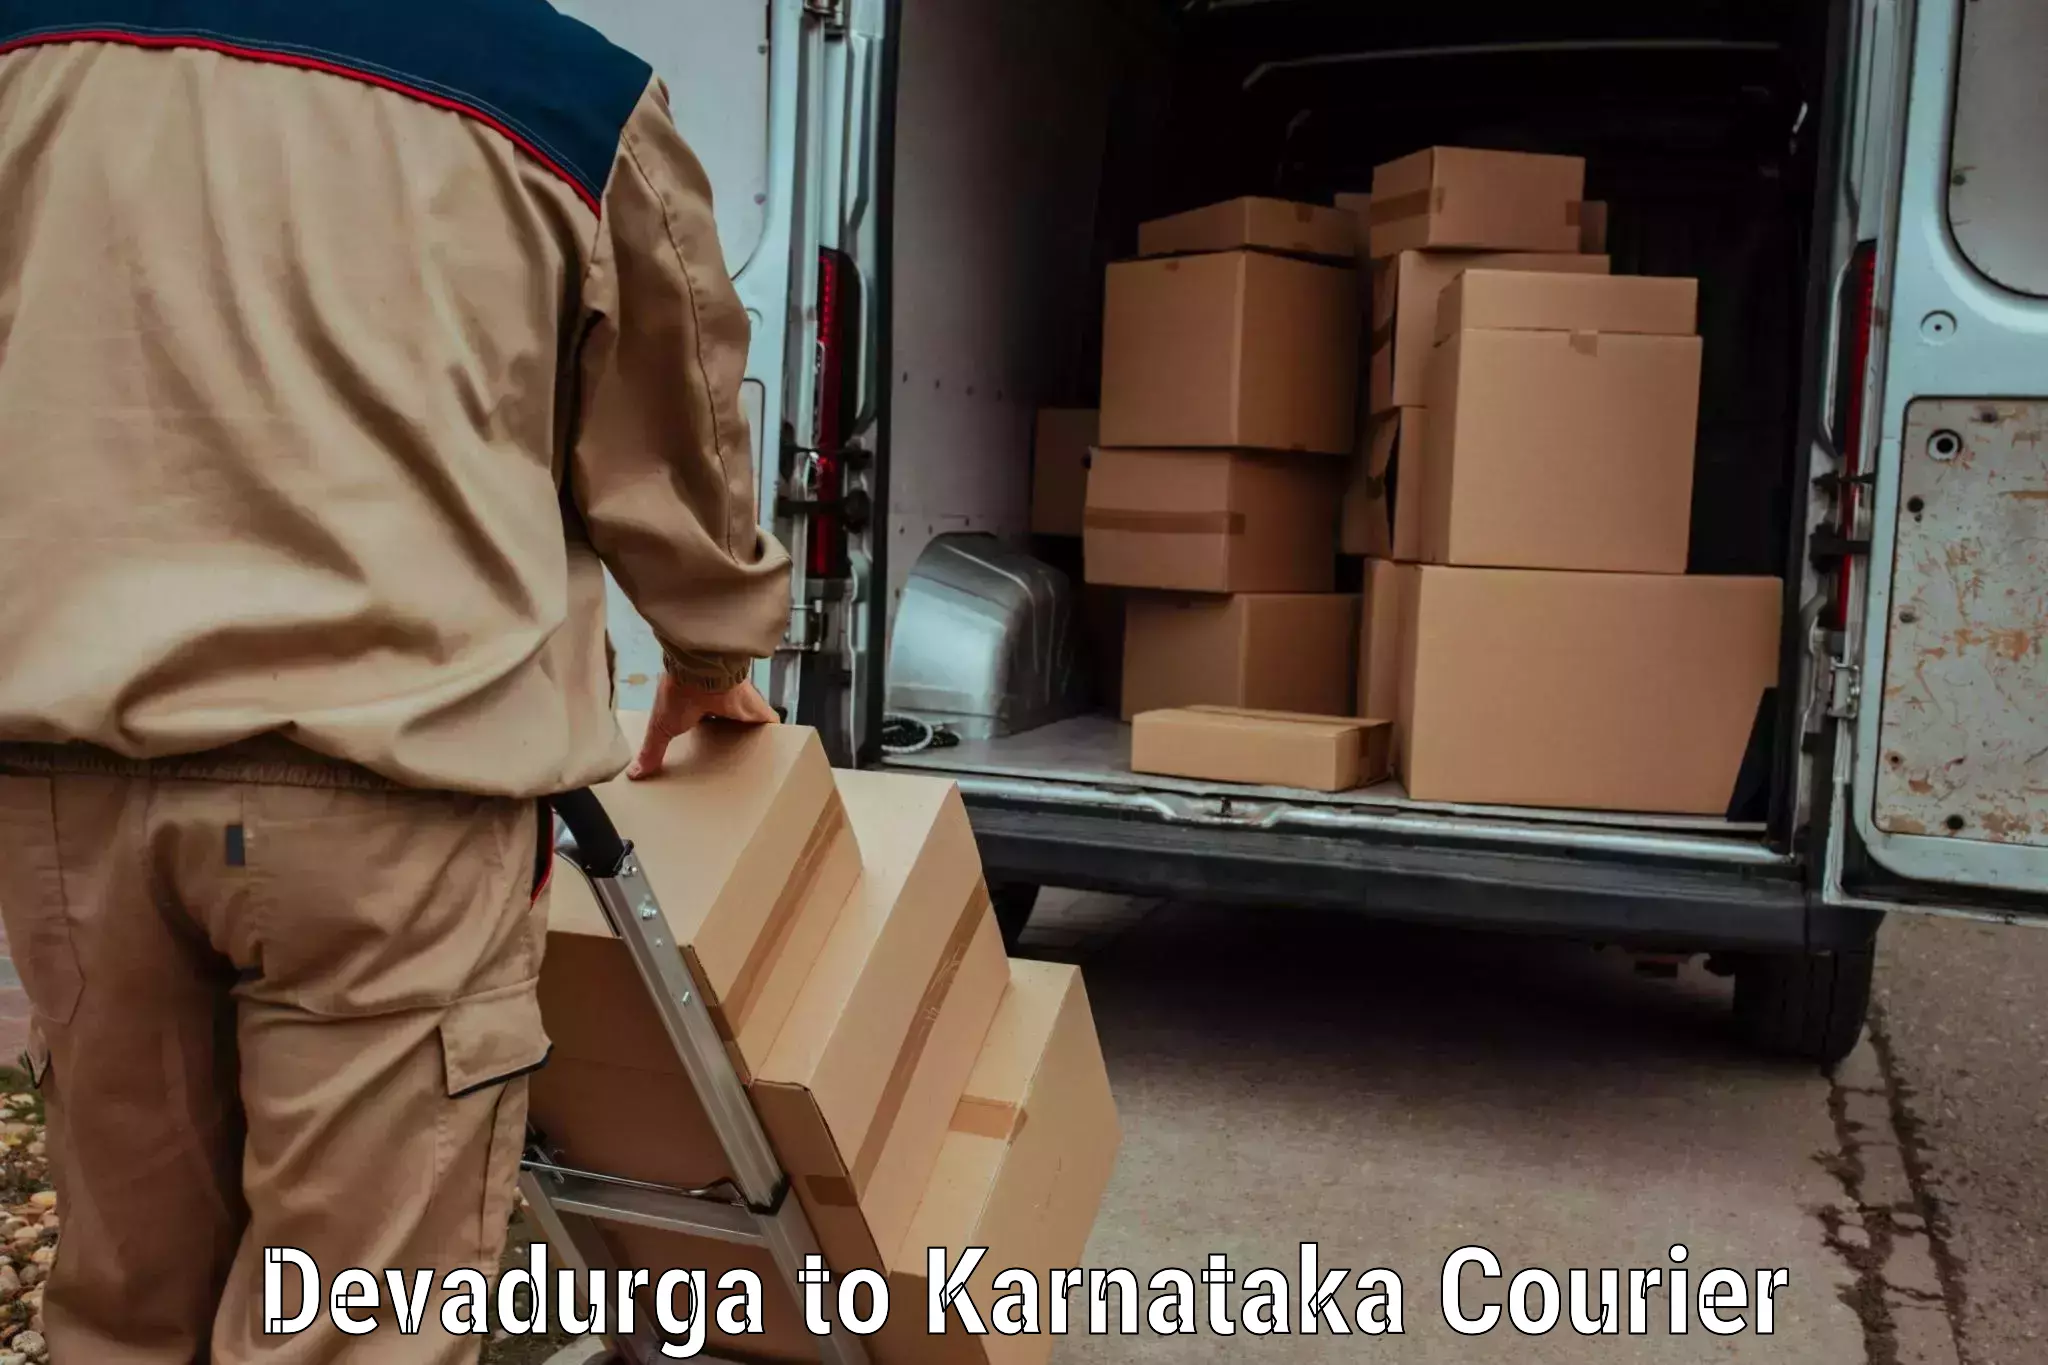 State-of-the-art courier technology Devadurga to Bangalore